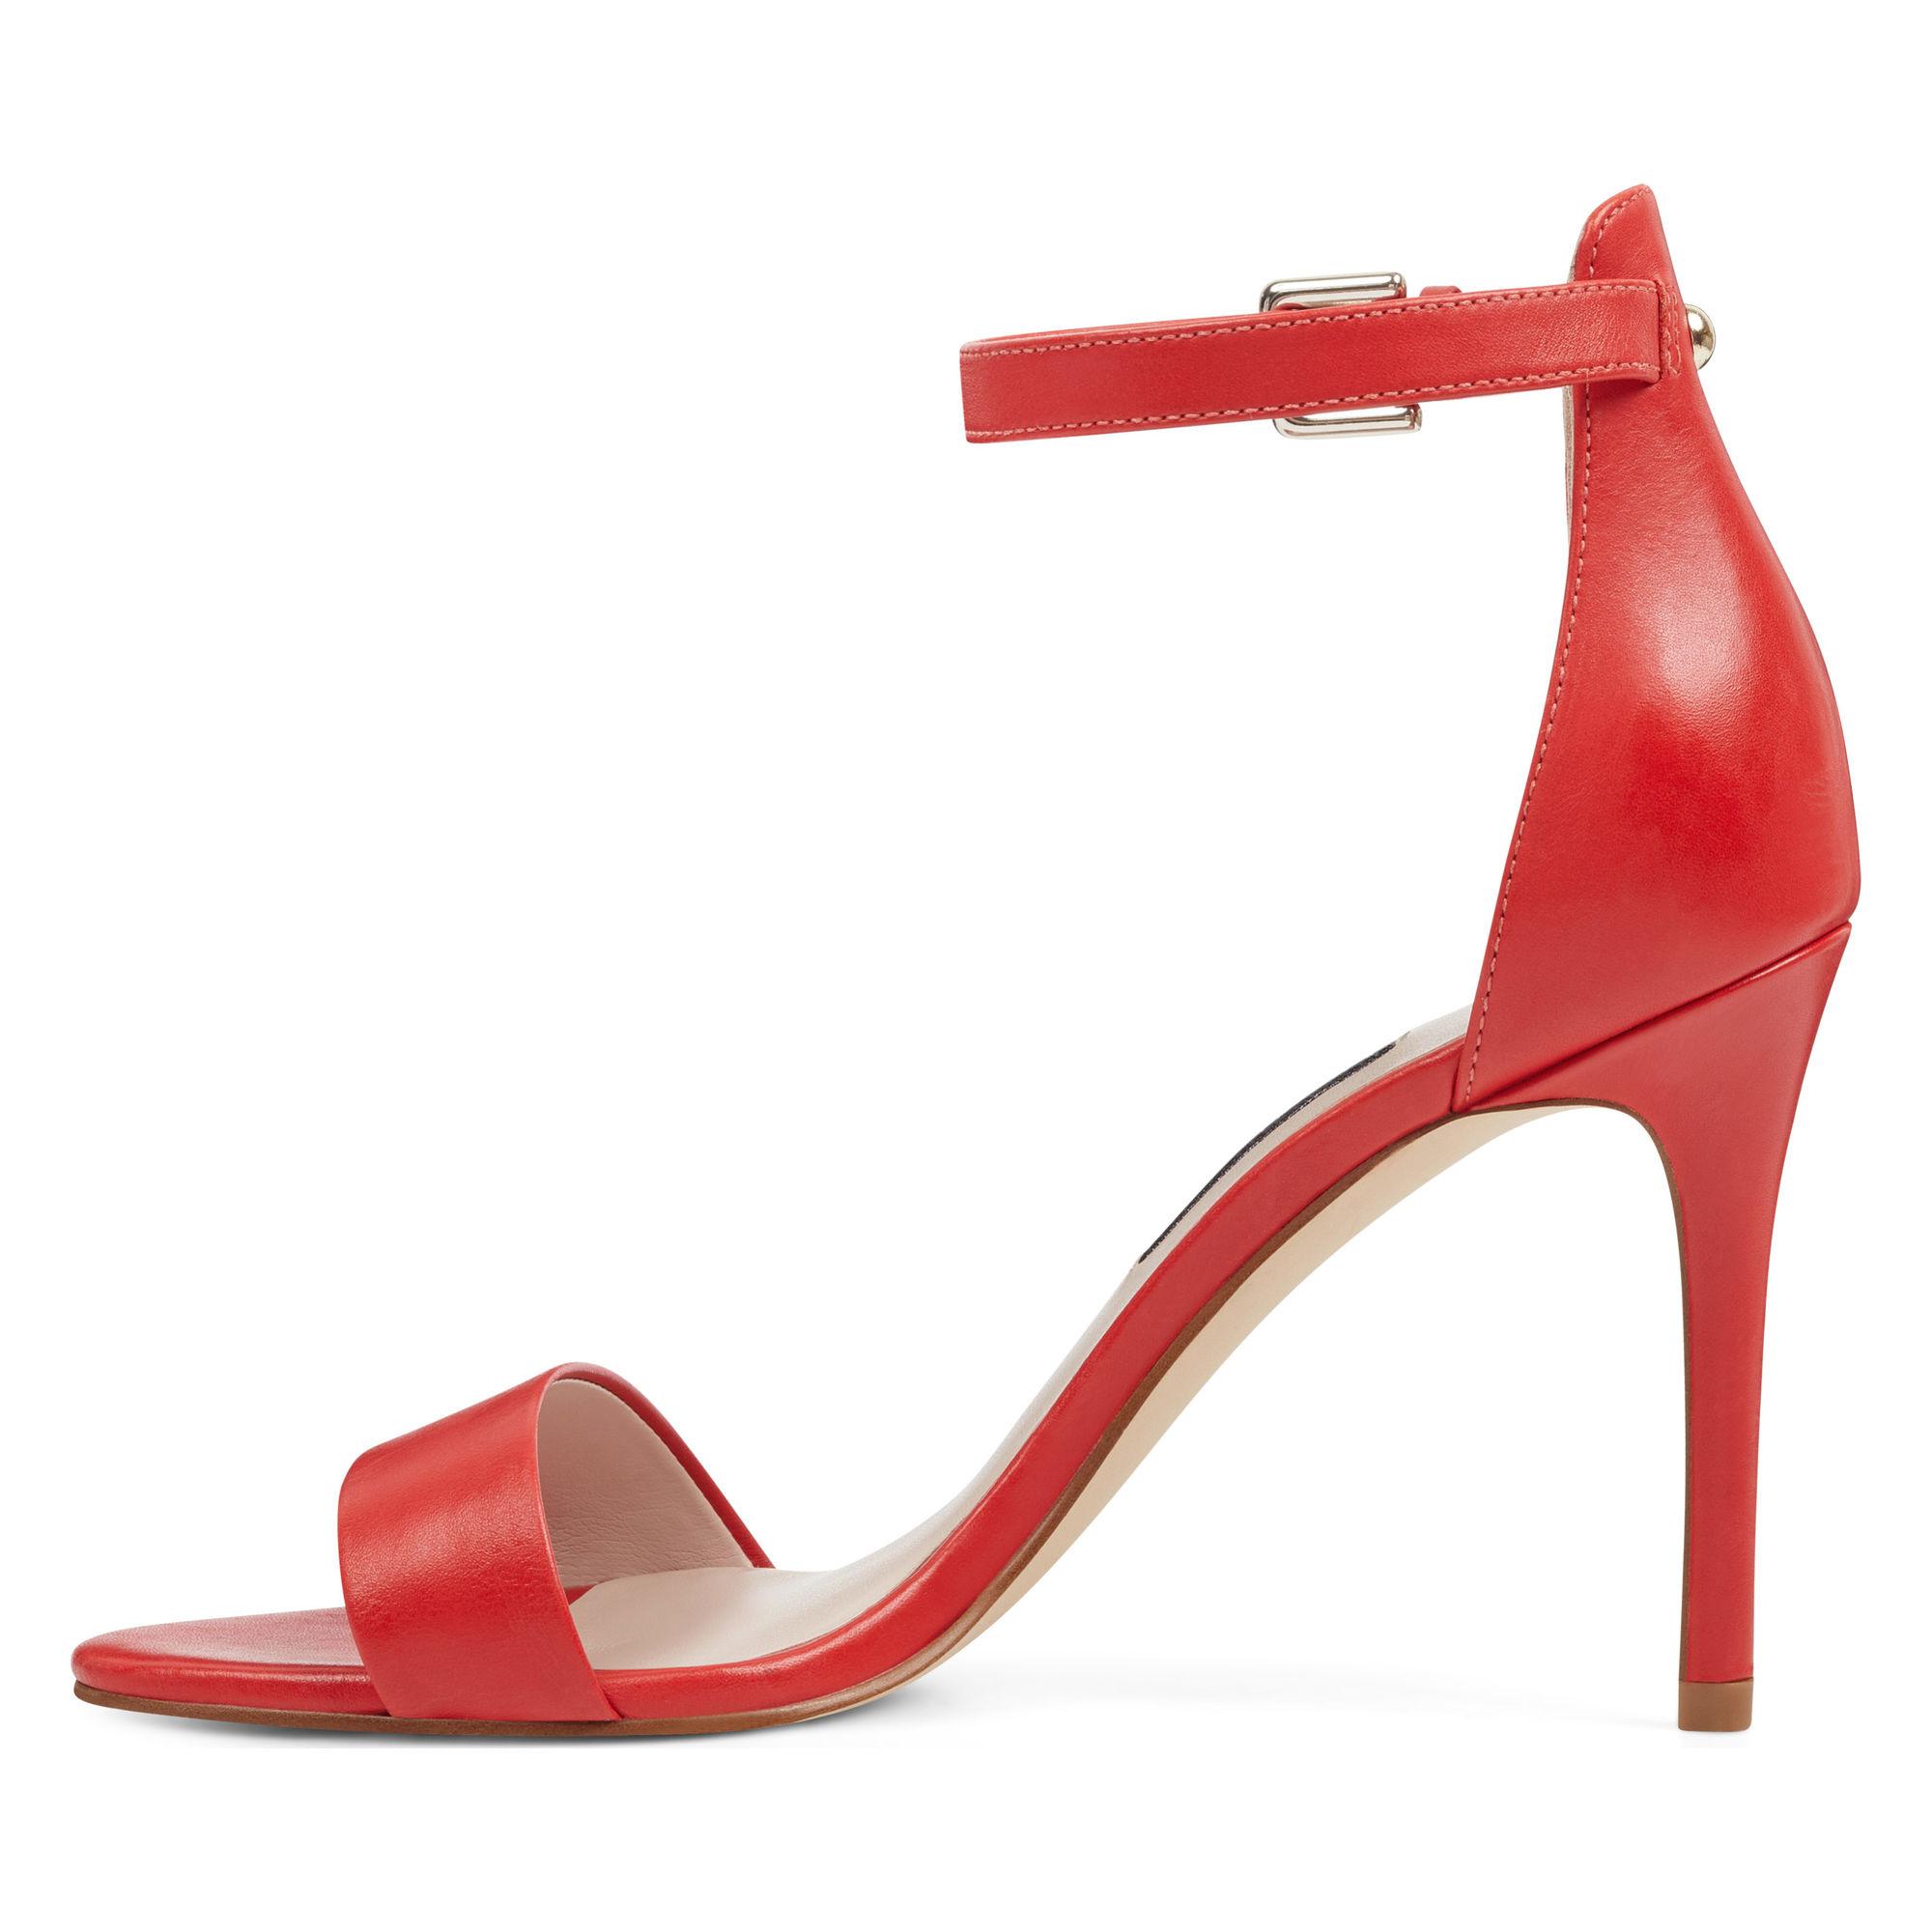 Nine West Leather Mana Open Toe Sandals in Red Leather (Red) - Lyst